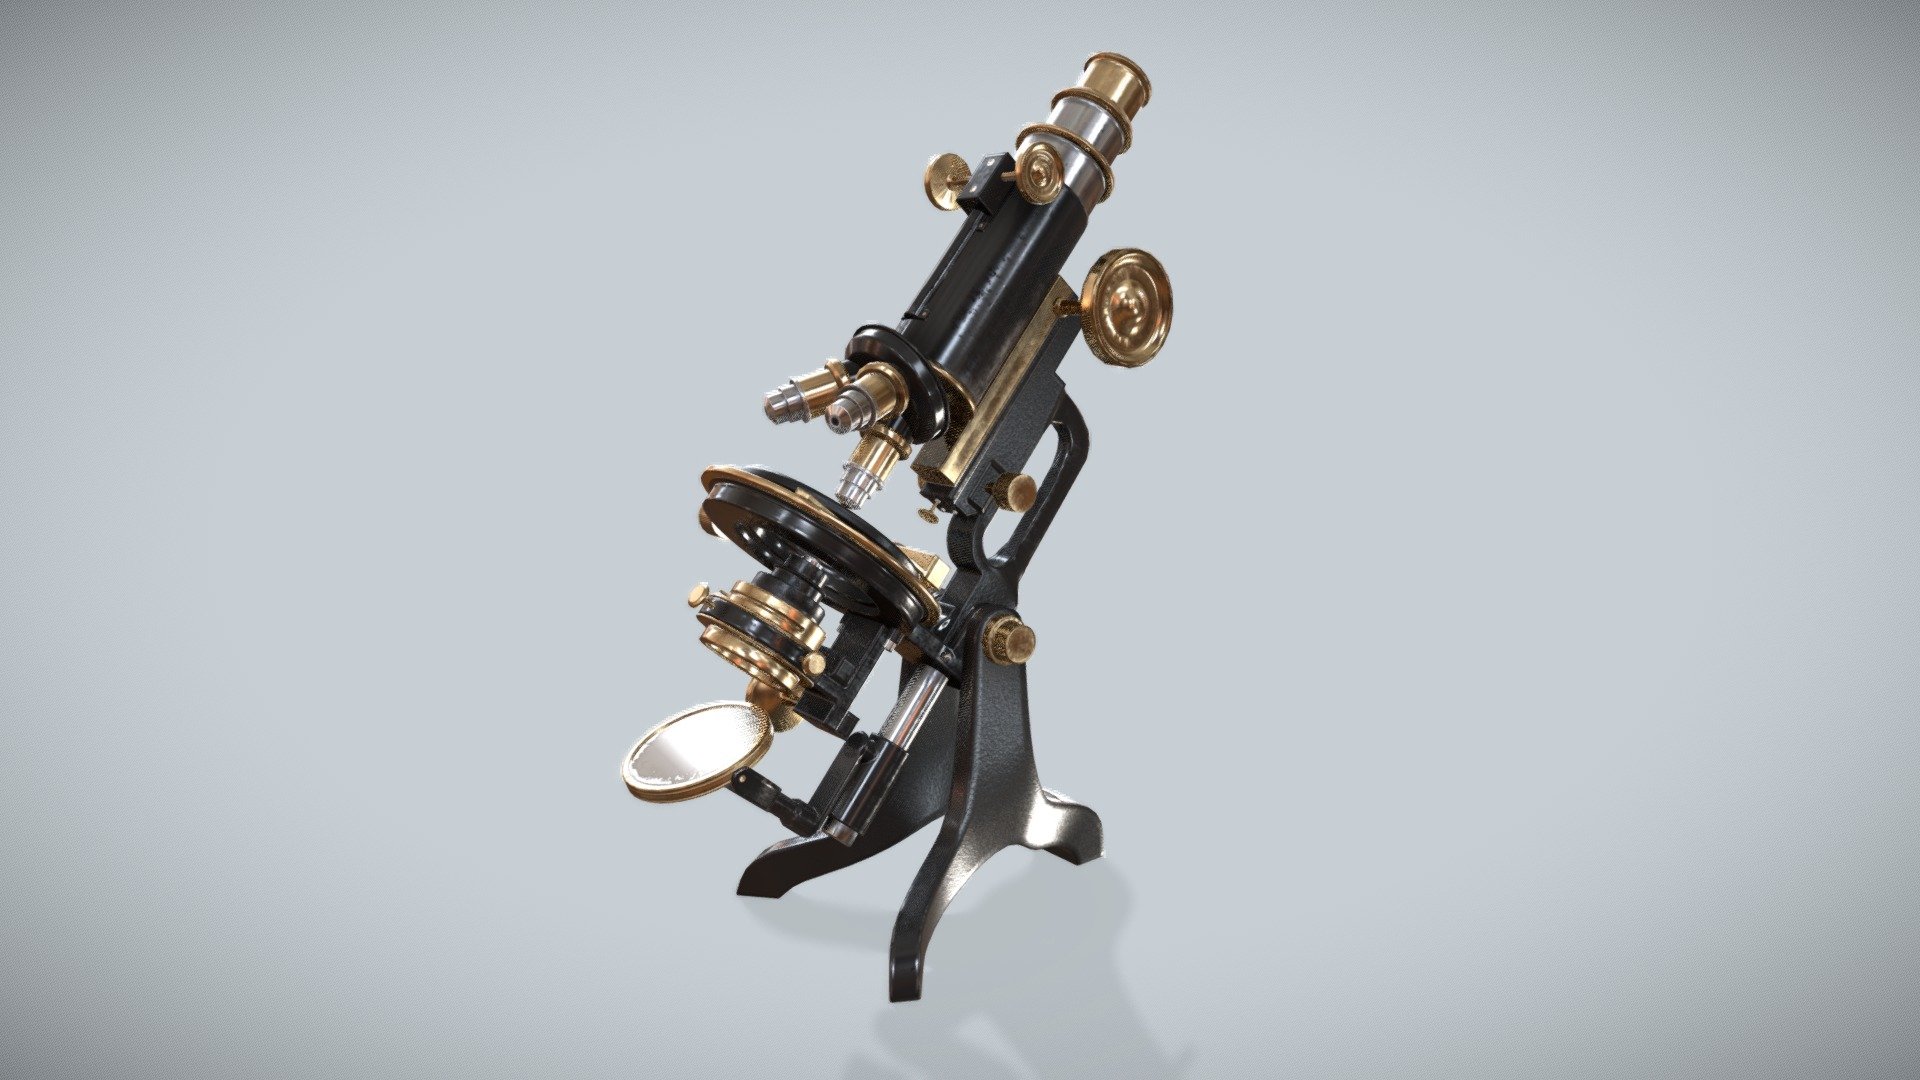 Here's a model of an antique microscope I made

C&amp;C are welcome! - An Antique Microscope - 3D model by Noel Chengalath (@Noel_Chengalath) 3d model